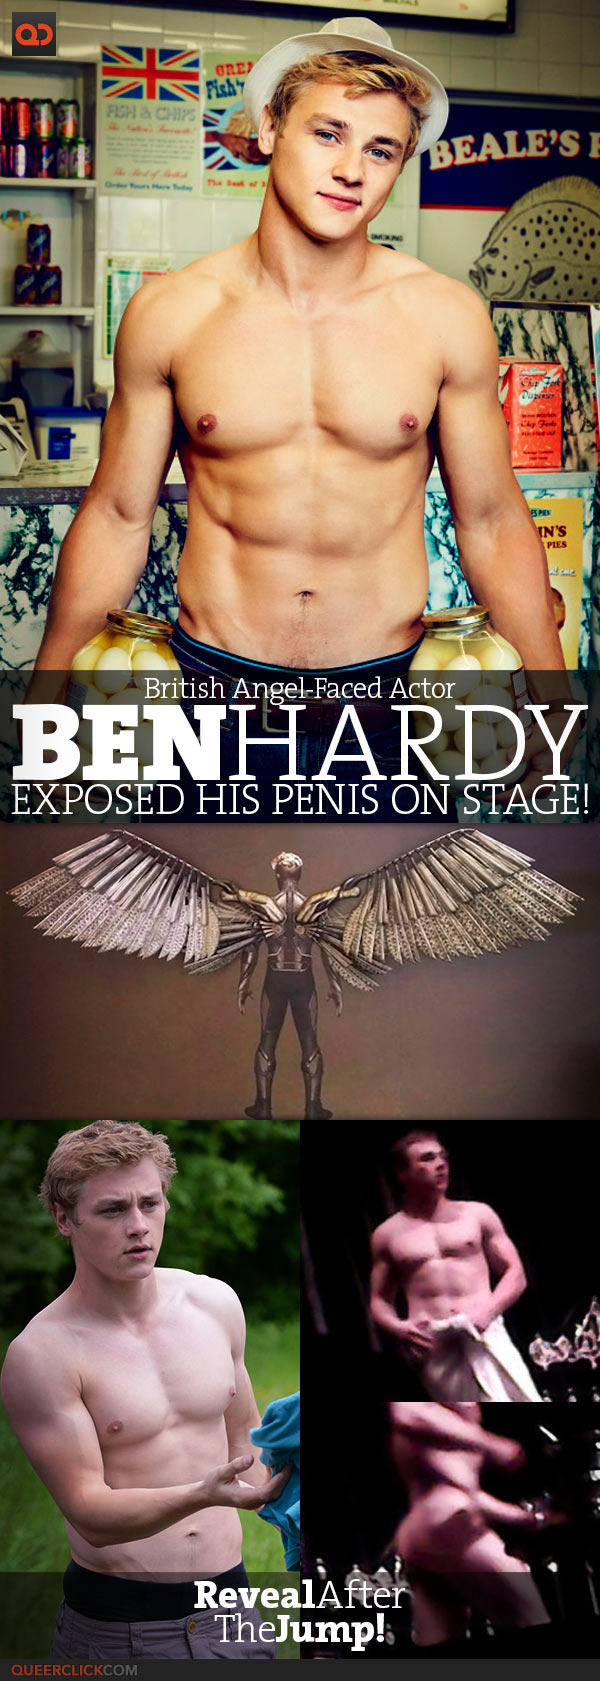 qc-exposed-celeb-ben_hardy-exposed_penis_on_stage-teaser